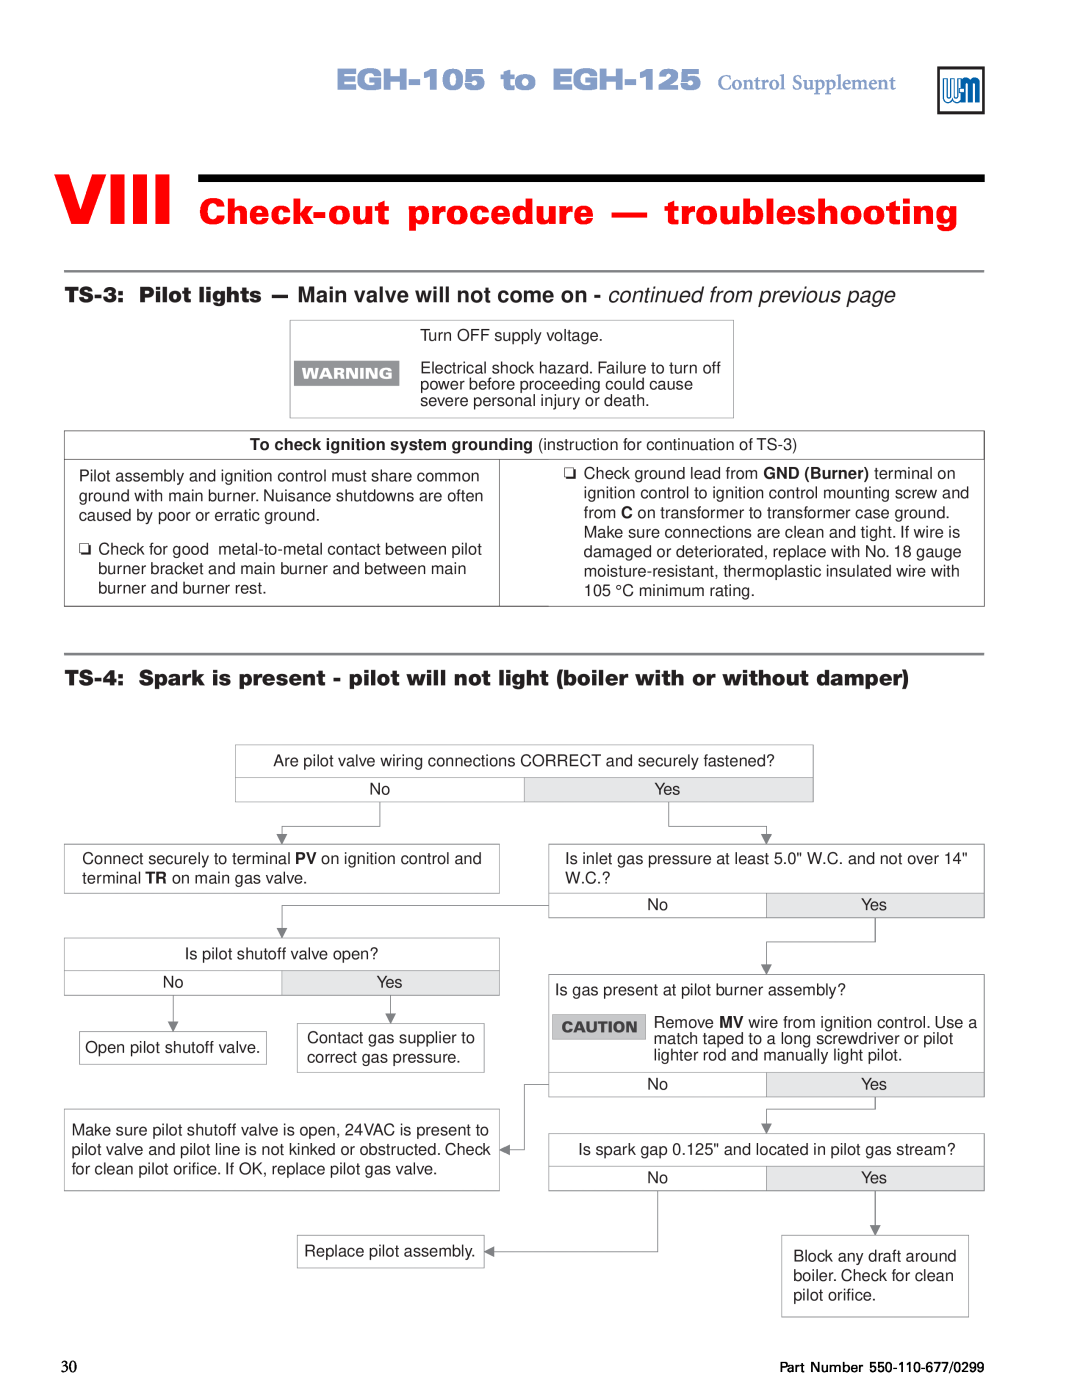 Weil-McLain VIII Check-outprocedure - troubleshooting, EGH-105to EGH-125 Control Supplement, Turn OFF supply voltage 